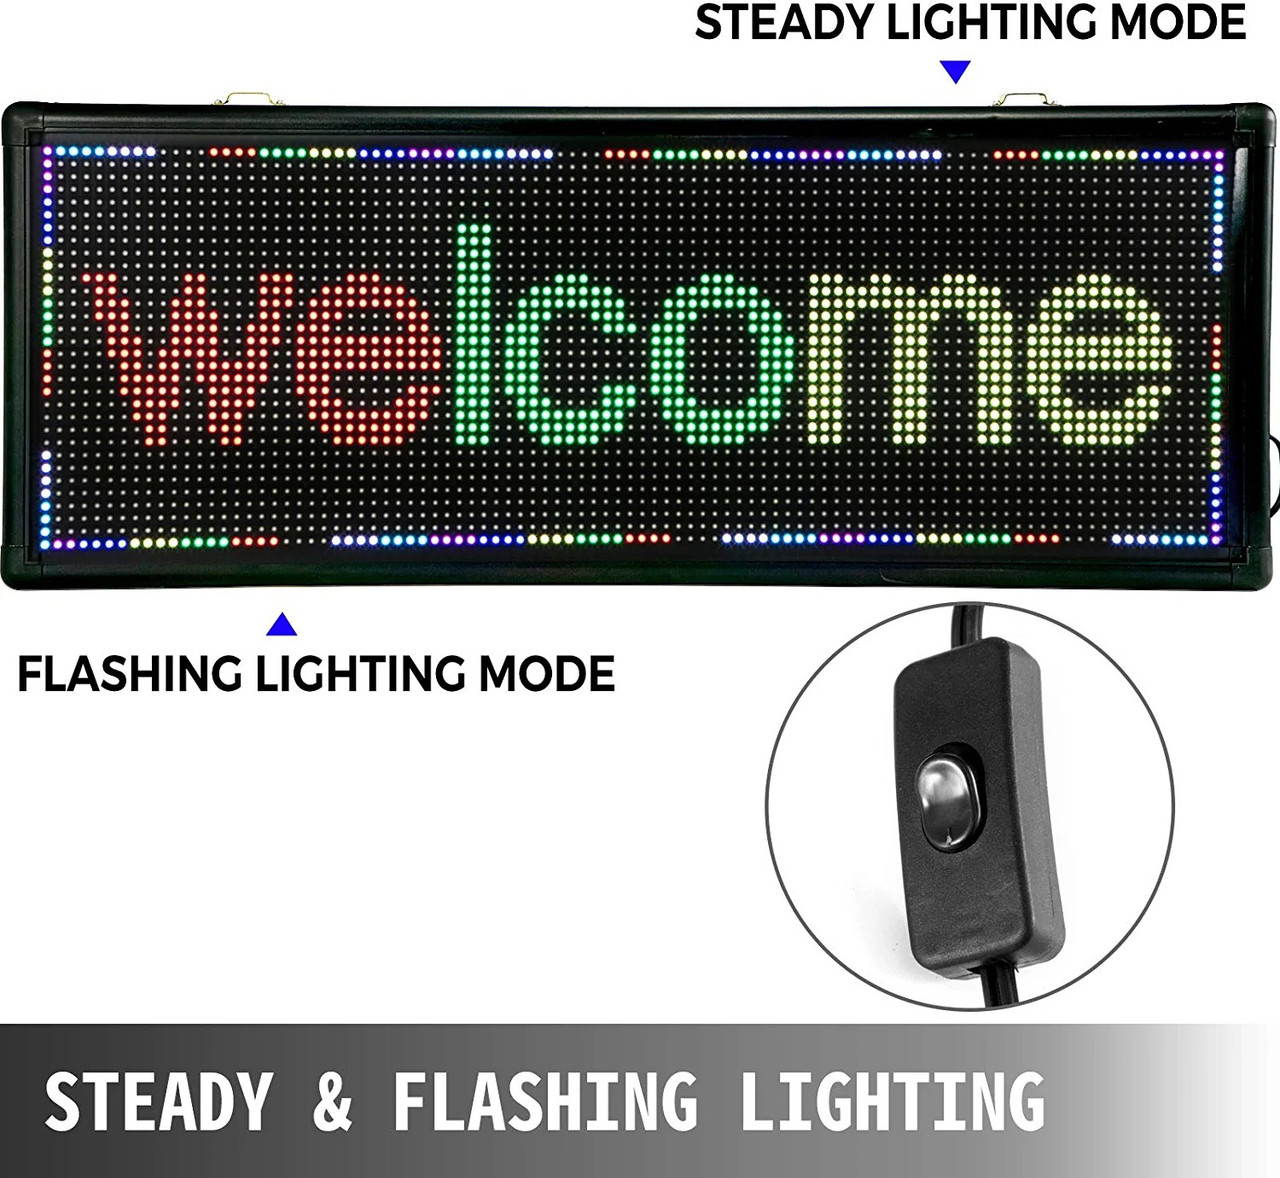 LED sign 40 x 9 with WiFi, RGB color sign with high resolution P6, and new  SMD technology with integrated power supply. Perfect solution for